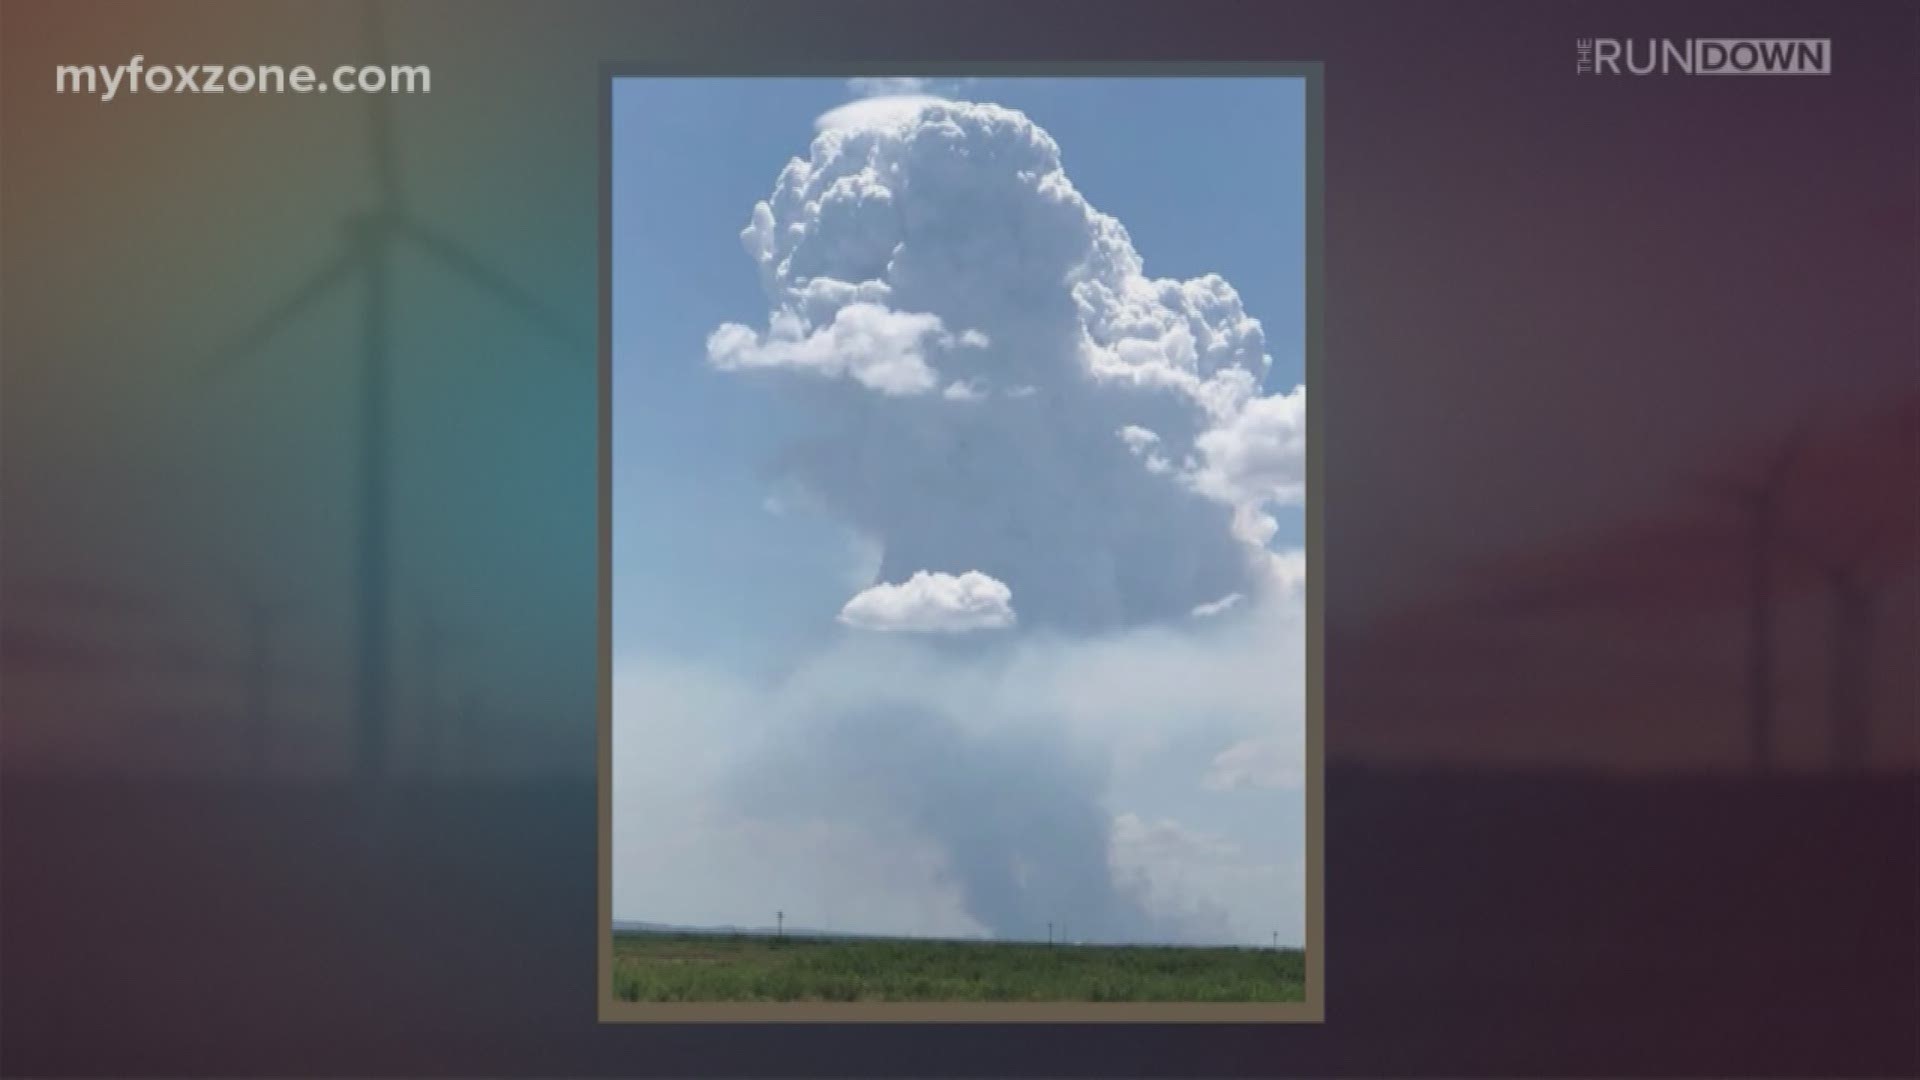 It was a sight that caught many of you by surprise. A towering cloud south of San Angelo that brought hope of some rain. As Chief Meteorologist Ricky Cody explains, that cloud was ignited by a grass fire.